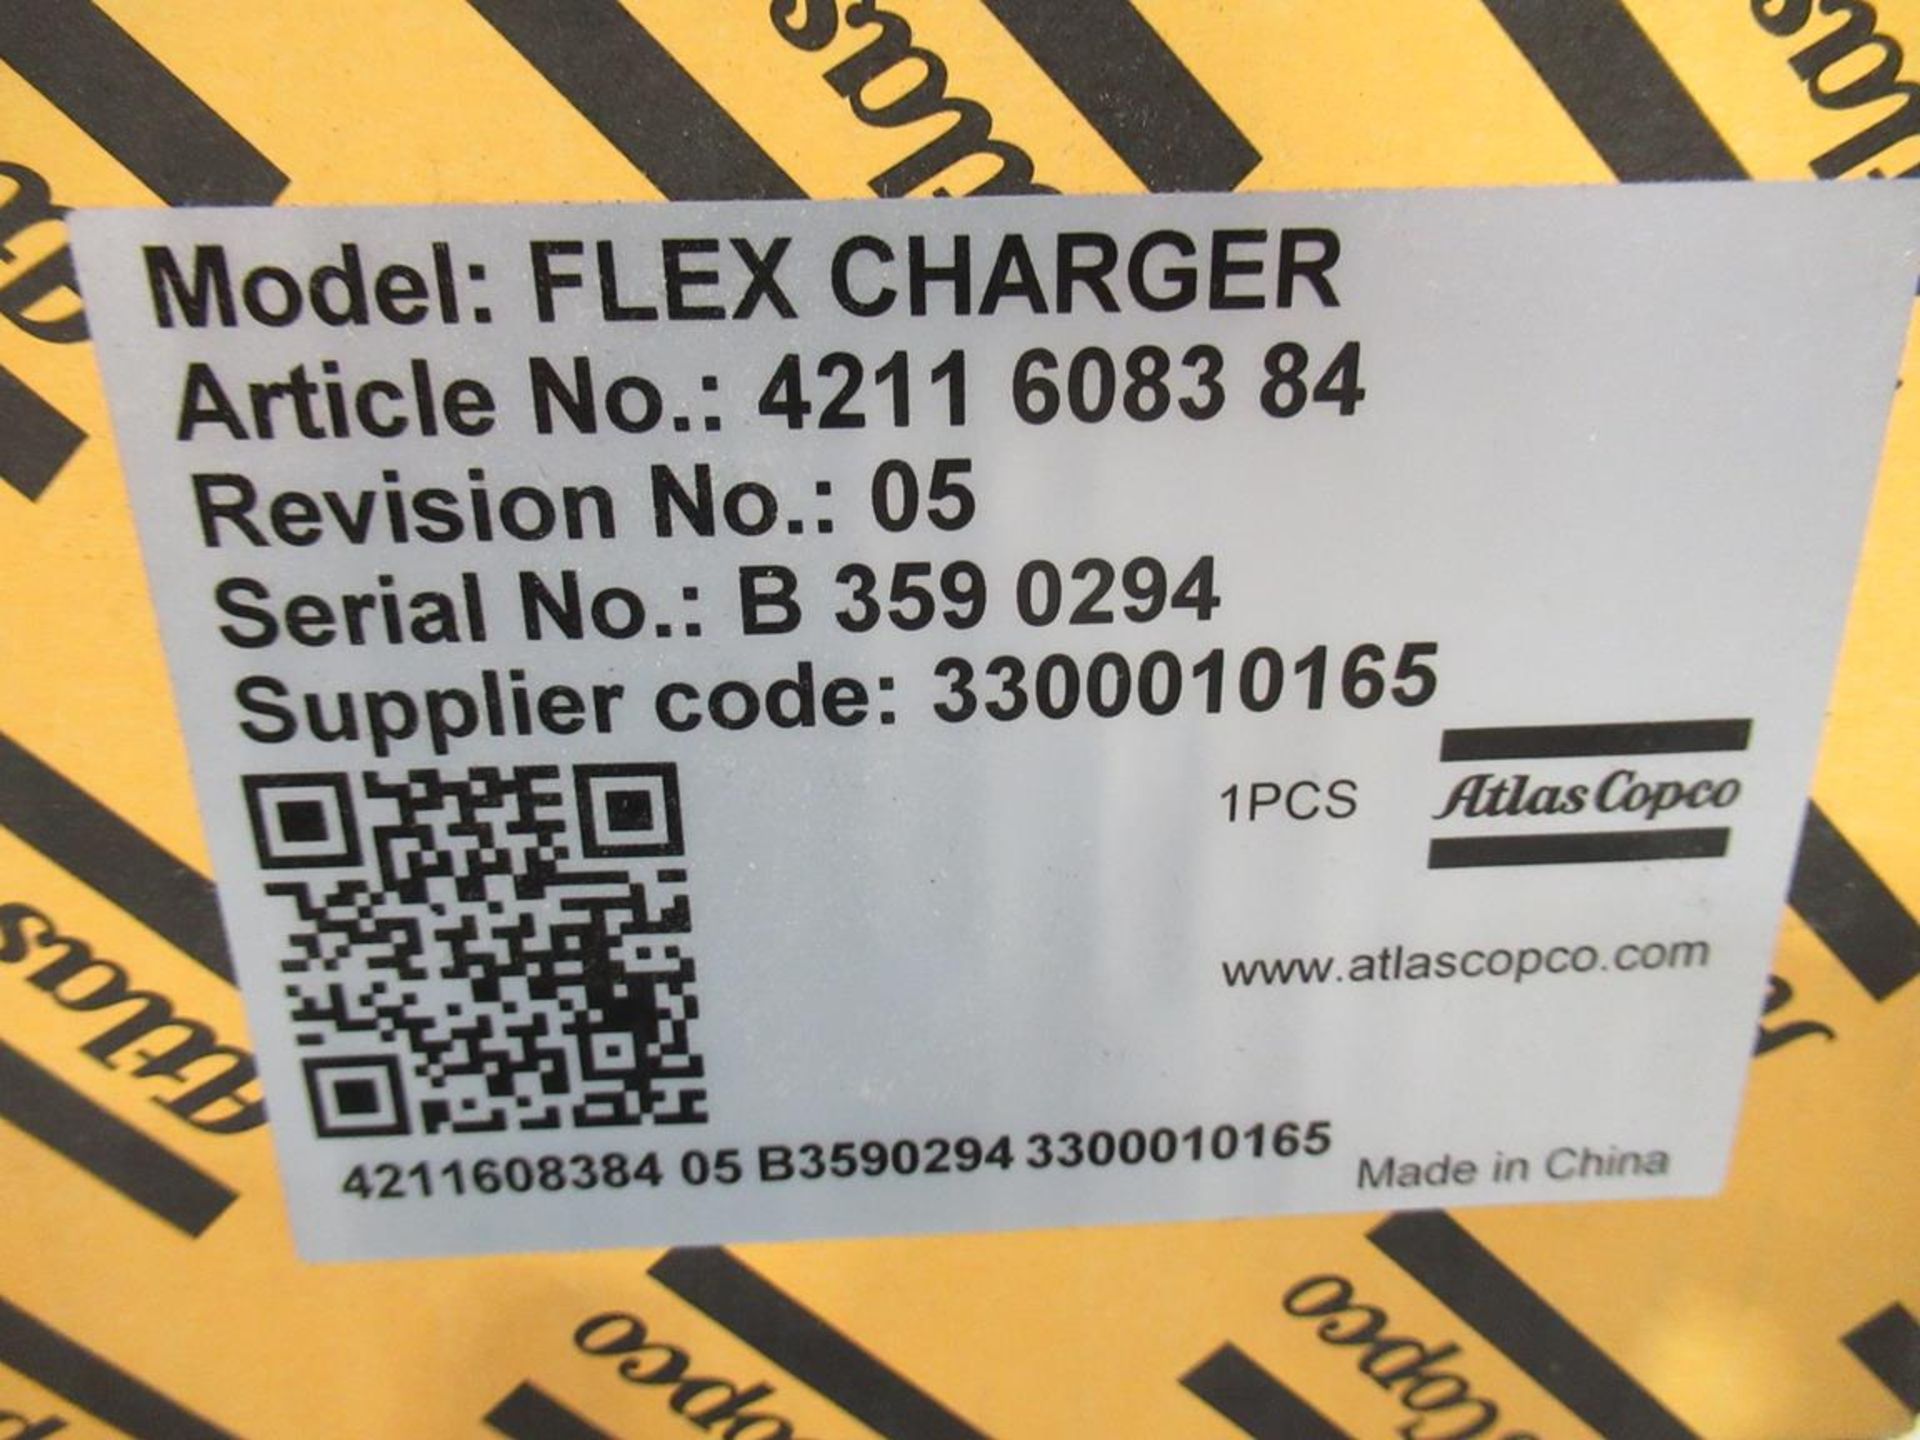 4x (no.) Atlas Copco, flex charger, Article No. 4211 6083 84 (boxed and unused) - Image 3 of 4